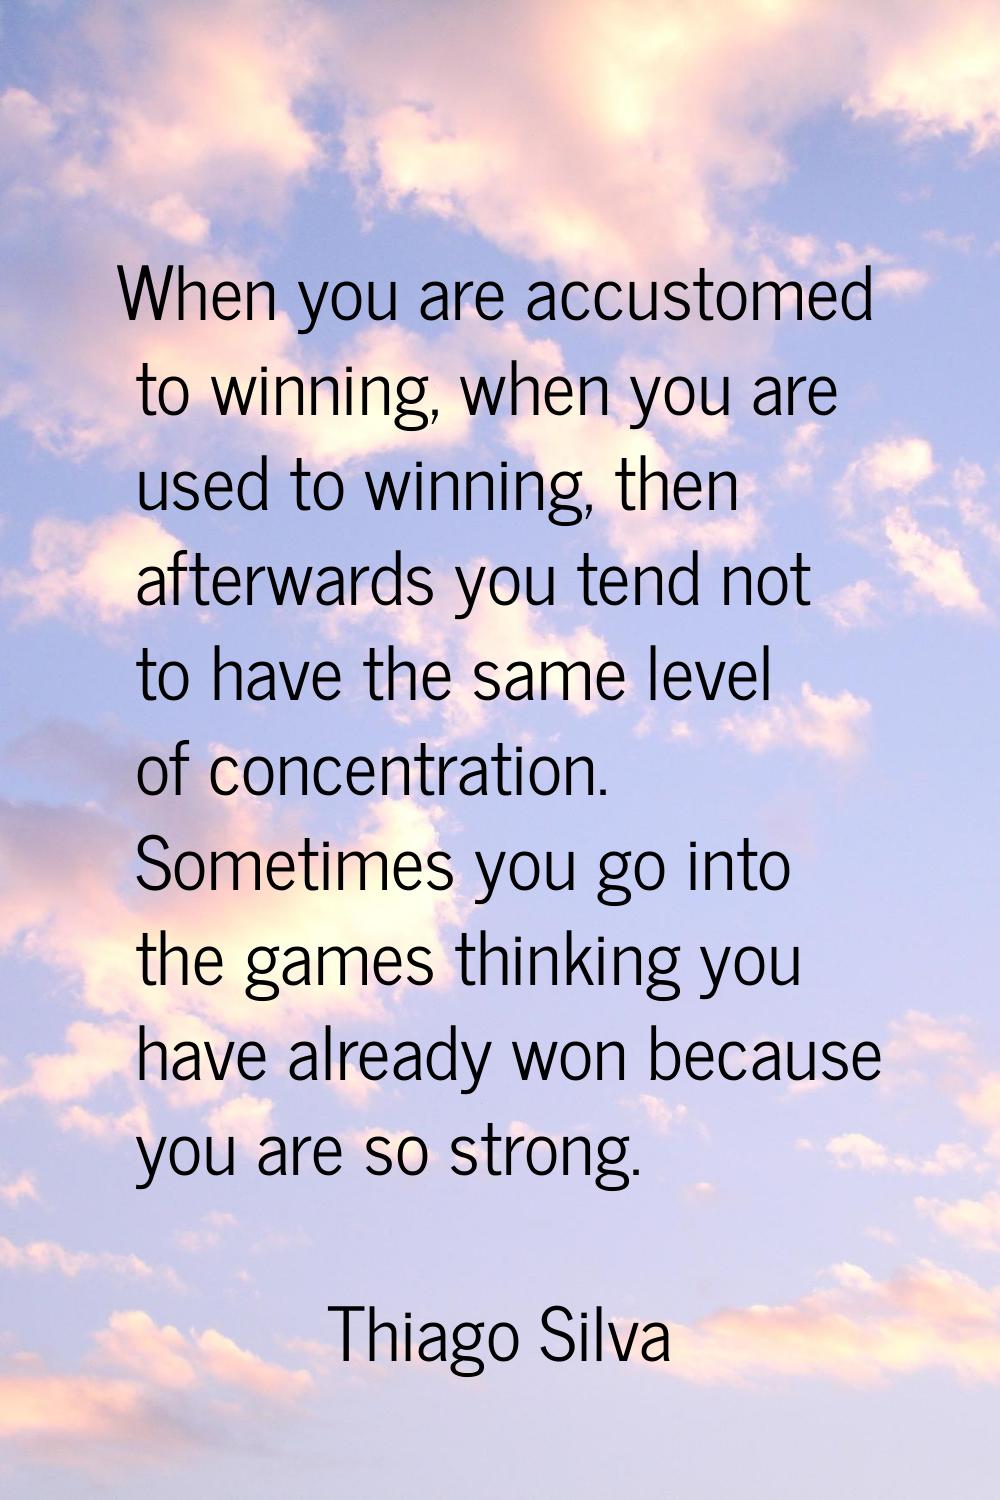 When you are accustomed to winning, when you are used to winning, then afterwards you tend not to h